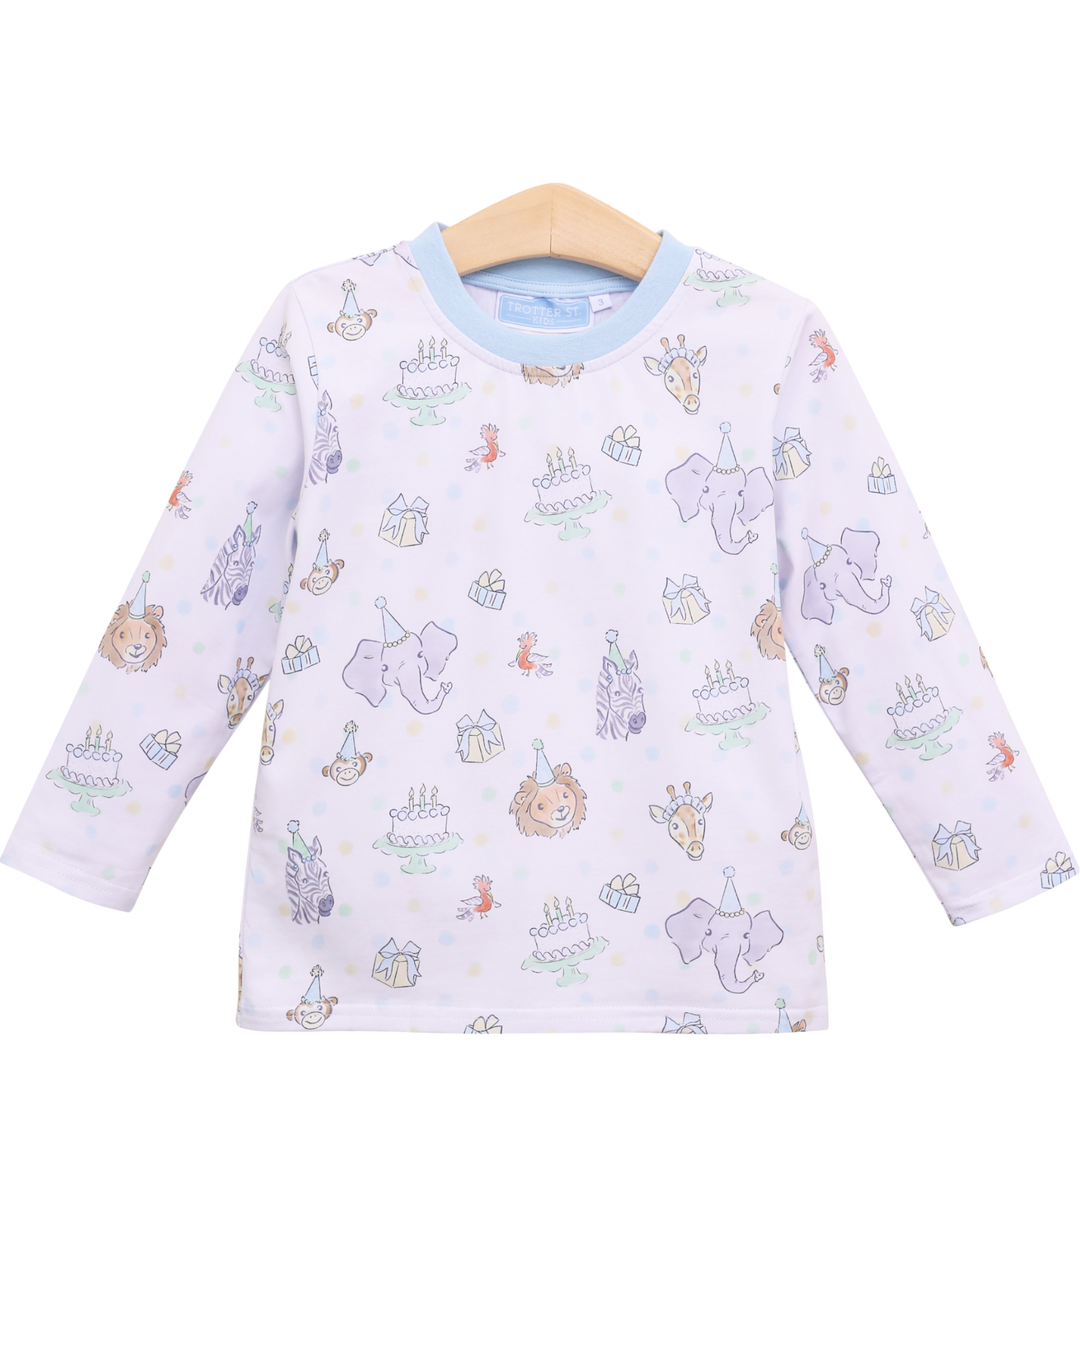 Party Animals White with Blue Shirt, front